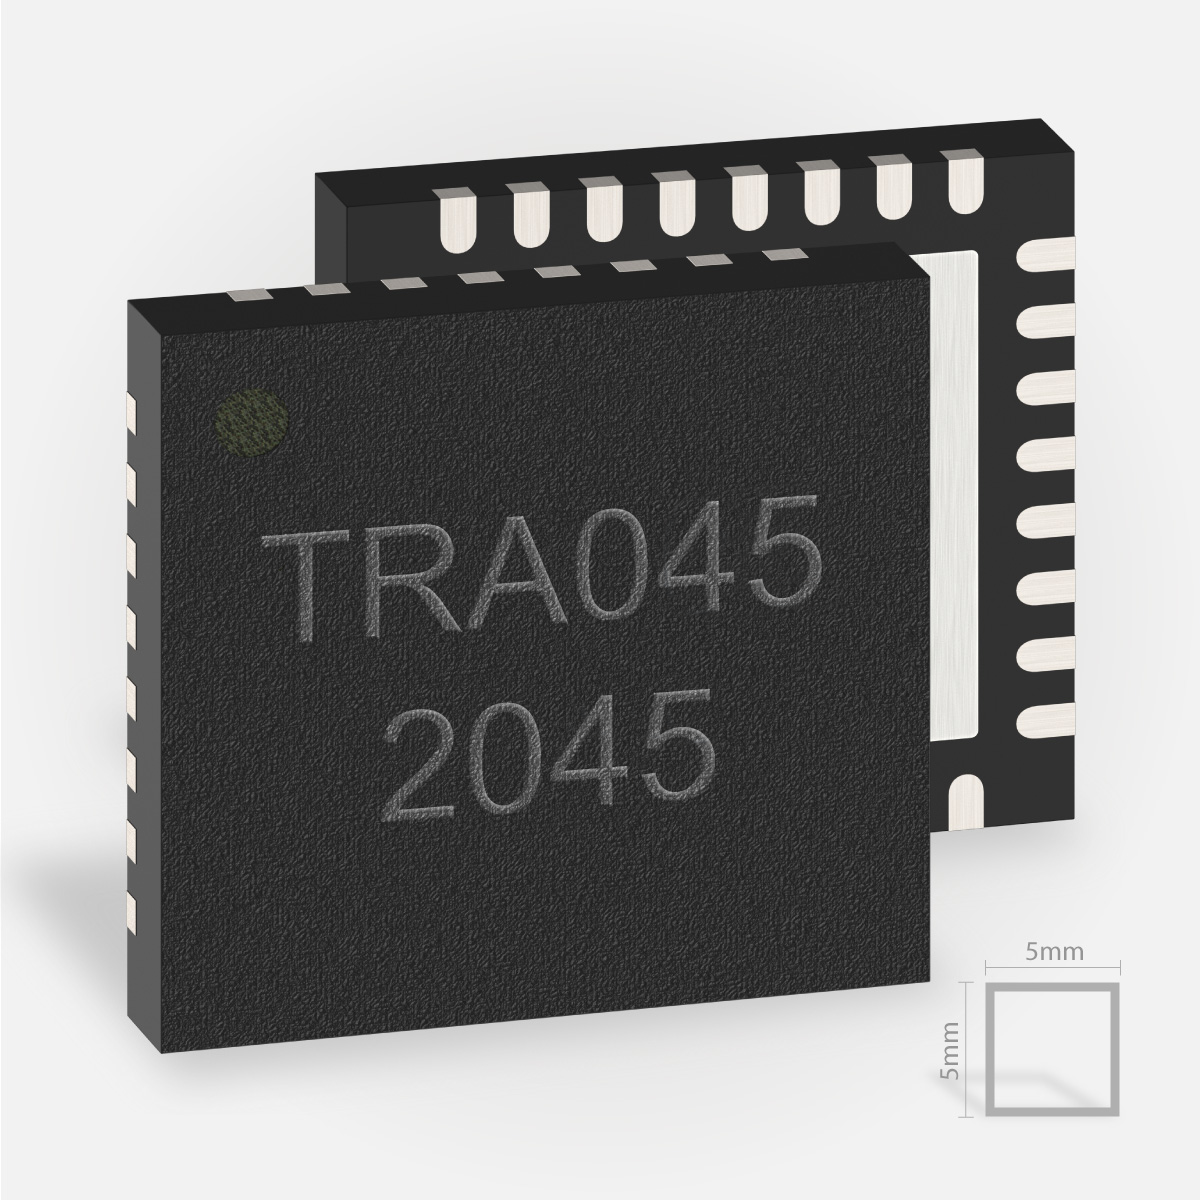 The-TRA-120-045-From-indie-Semiconductor-Is-Available-At-Symmetry-Electronics